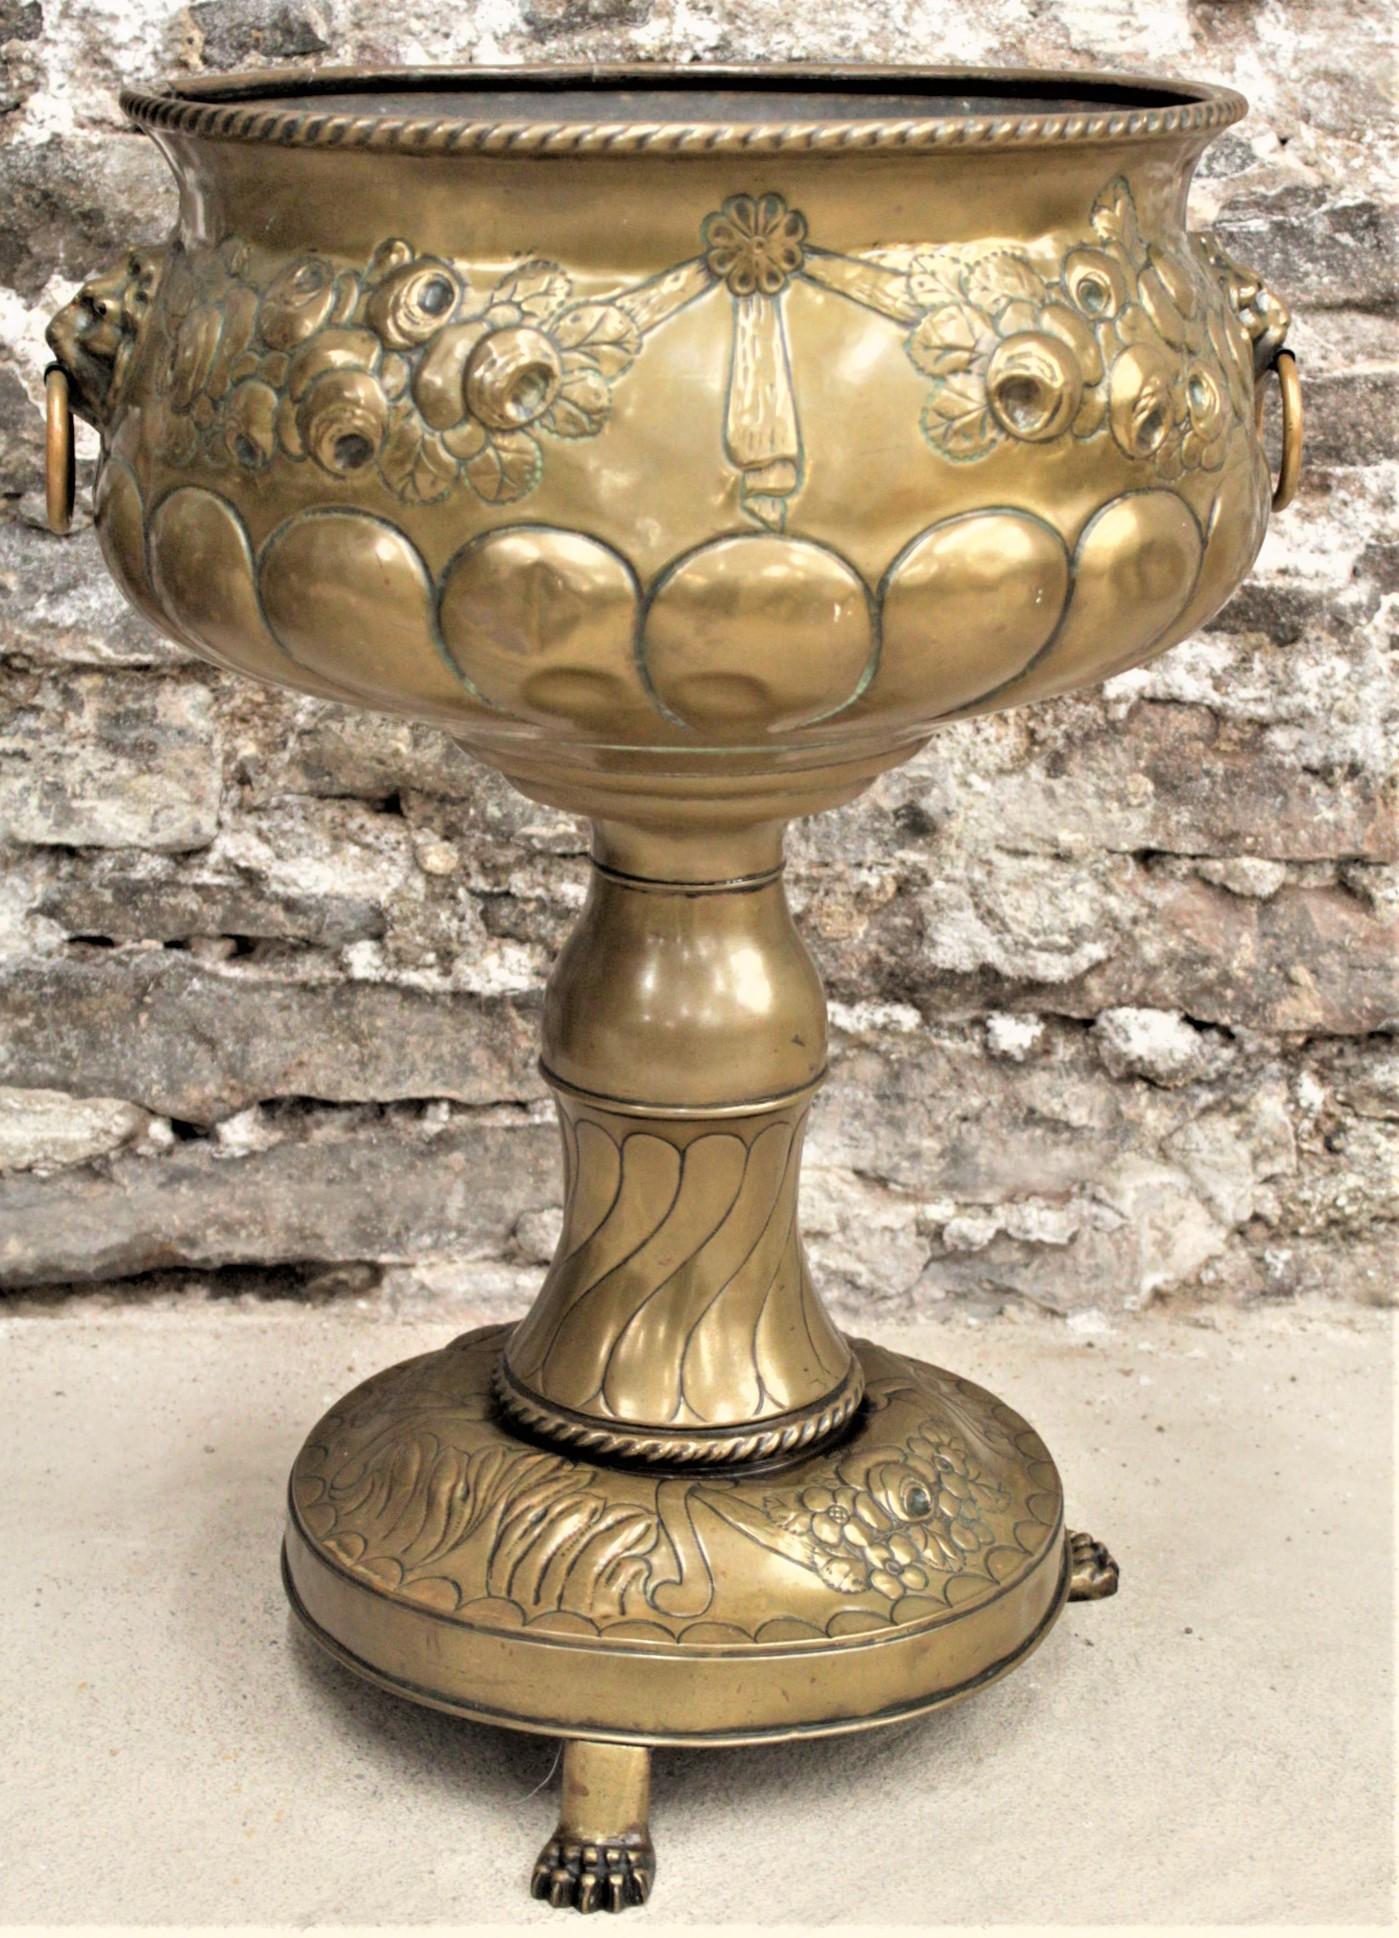 This antique planter is unsigned, so no specific maker could be determined, but it is presumed to have been made in the United States in circa 1890 in the period Victorian style. The planter is constructed of brass which has been heavily decorated